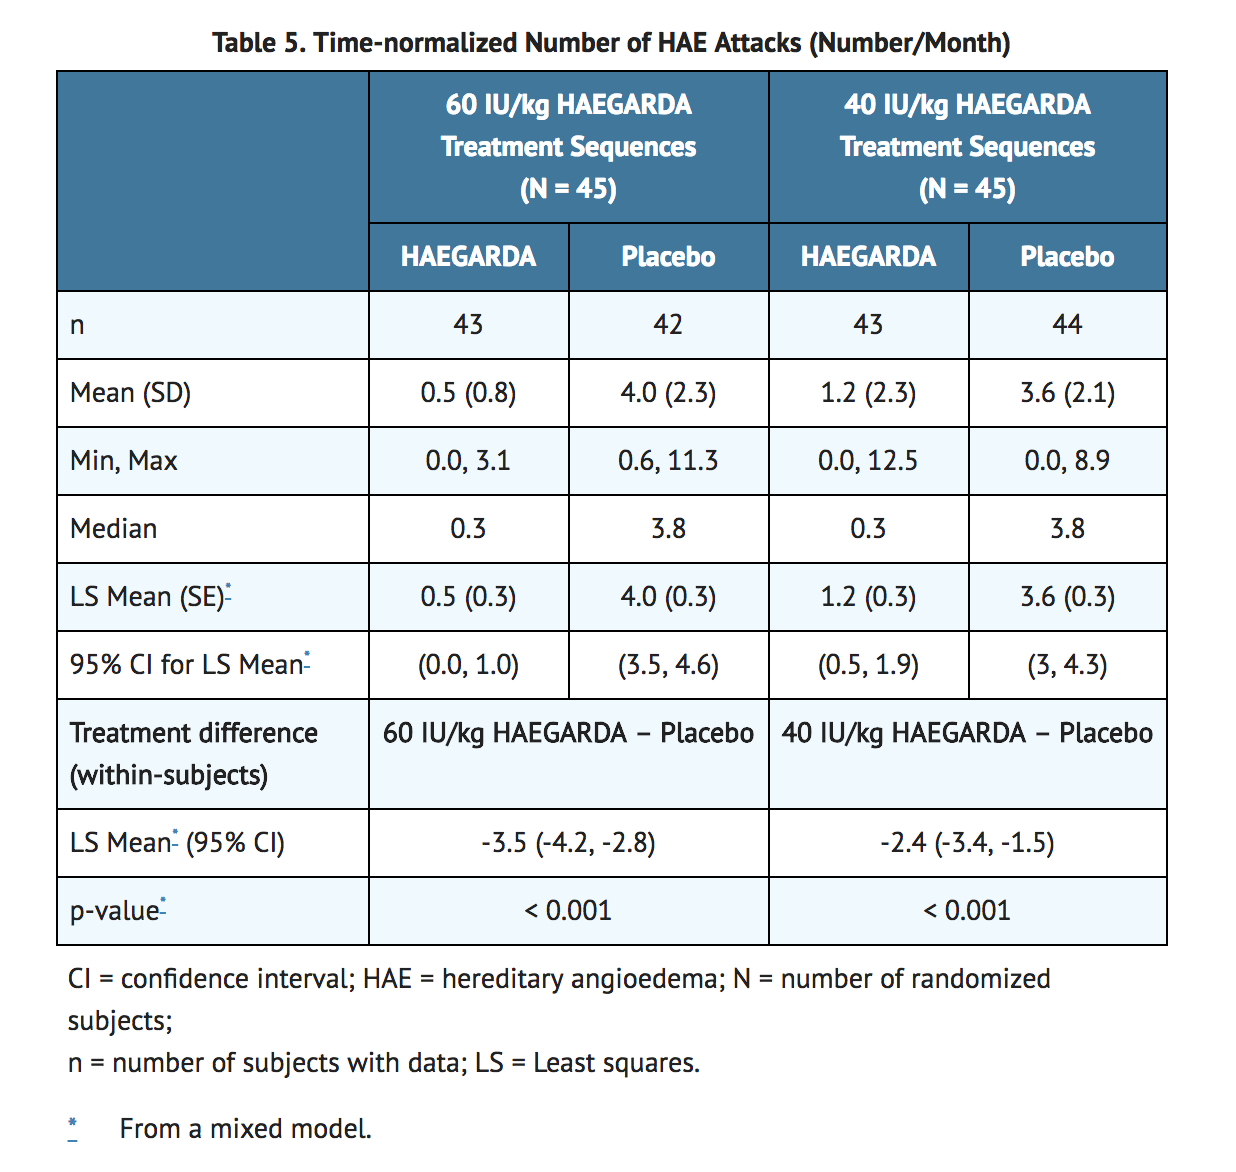 File:C1 esterase inhibitor subcutaneous Clinical Studies Table.png